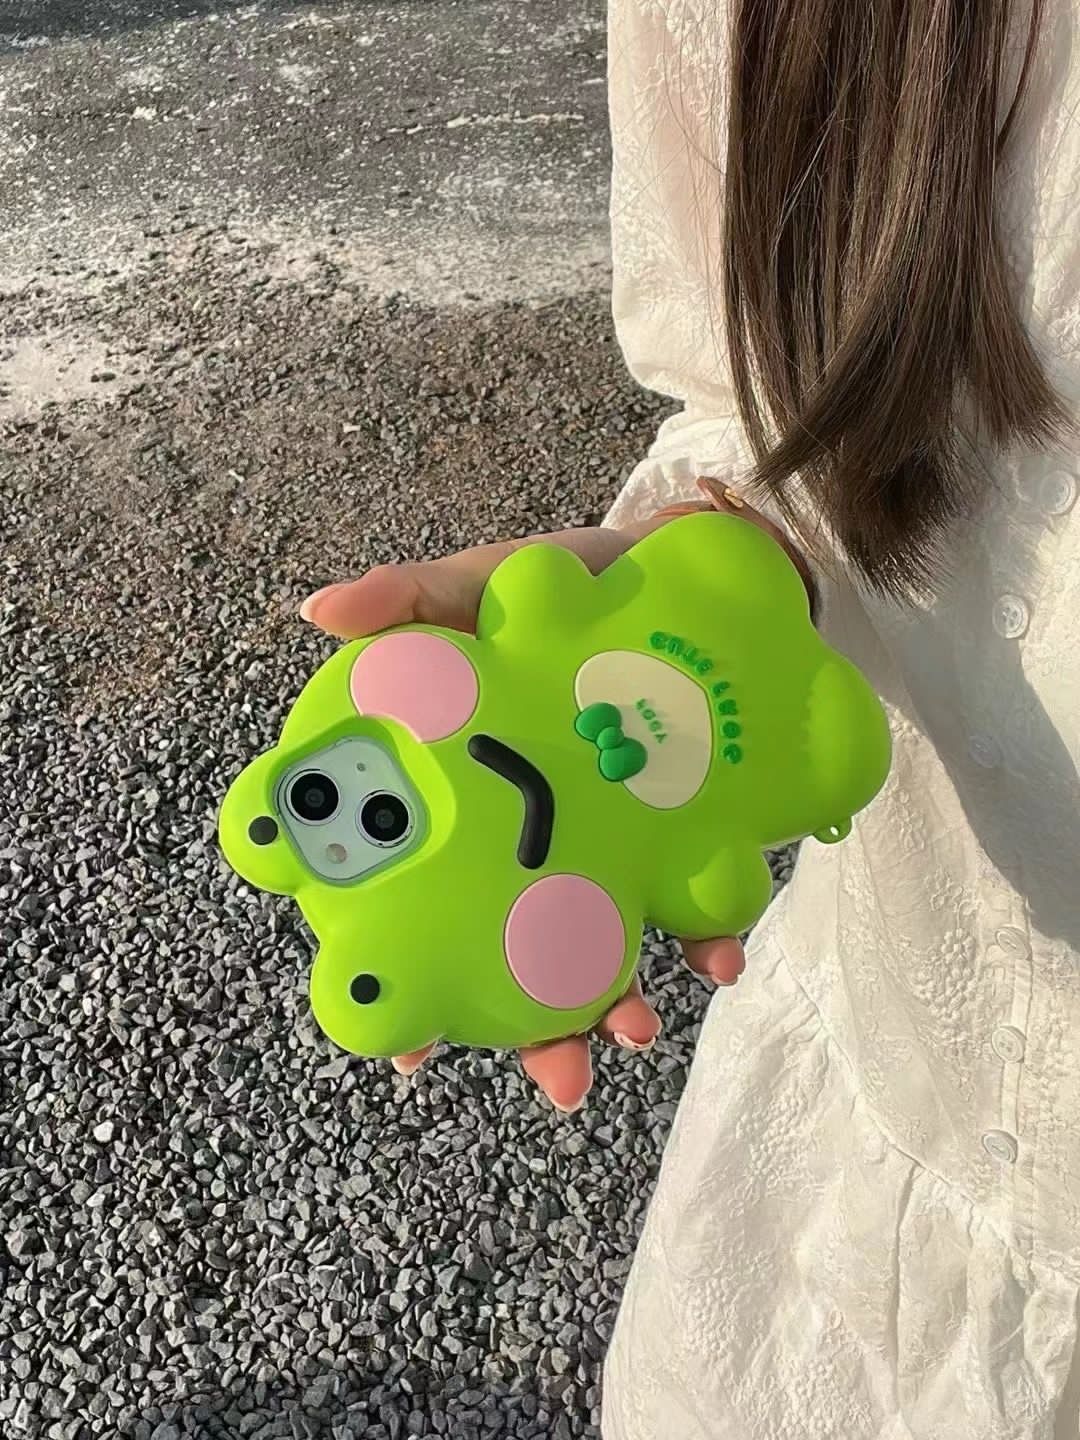 iPhone Cute 3D Big Frog Design Silicone Case Cover